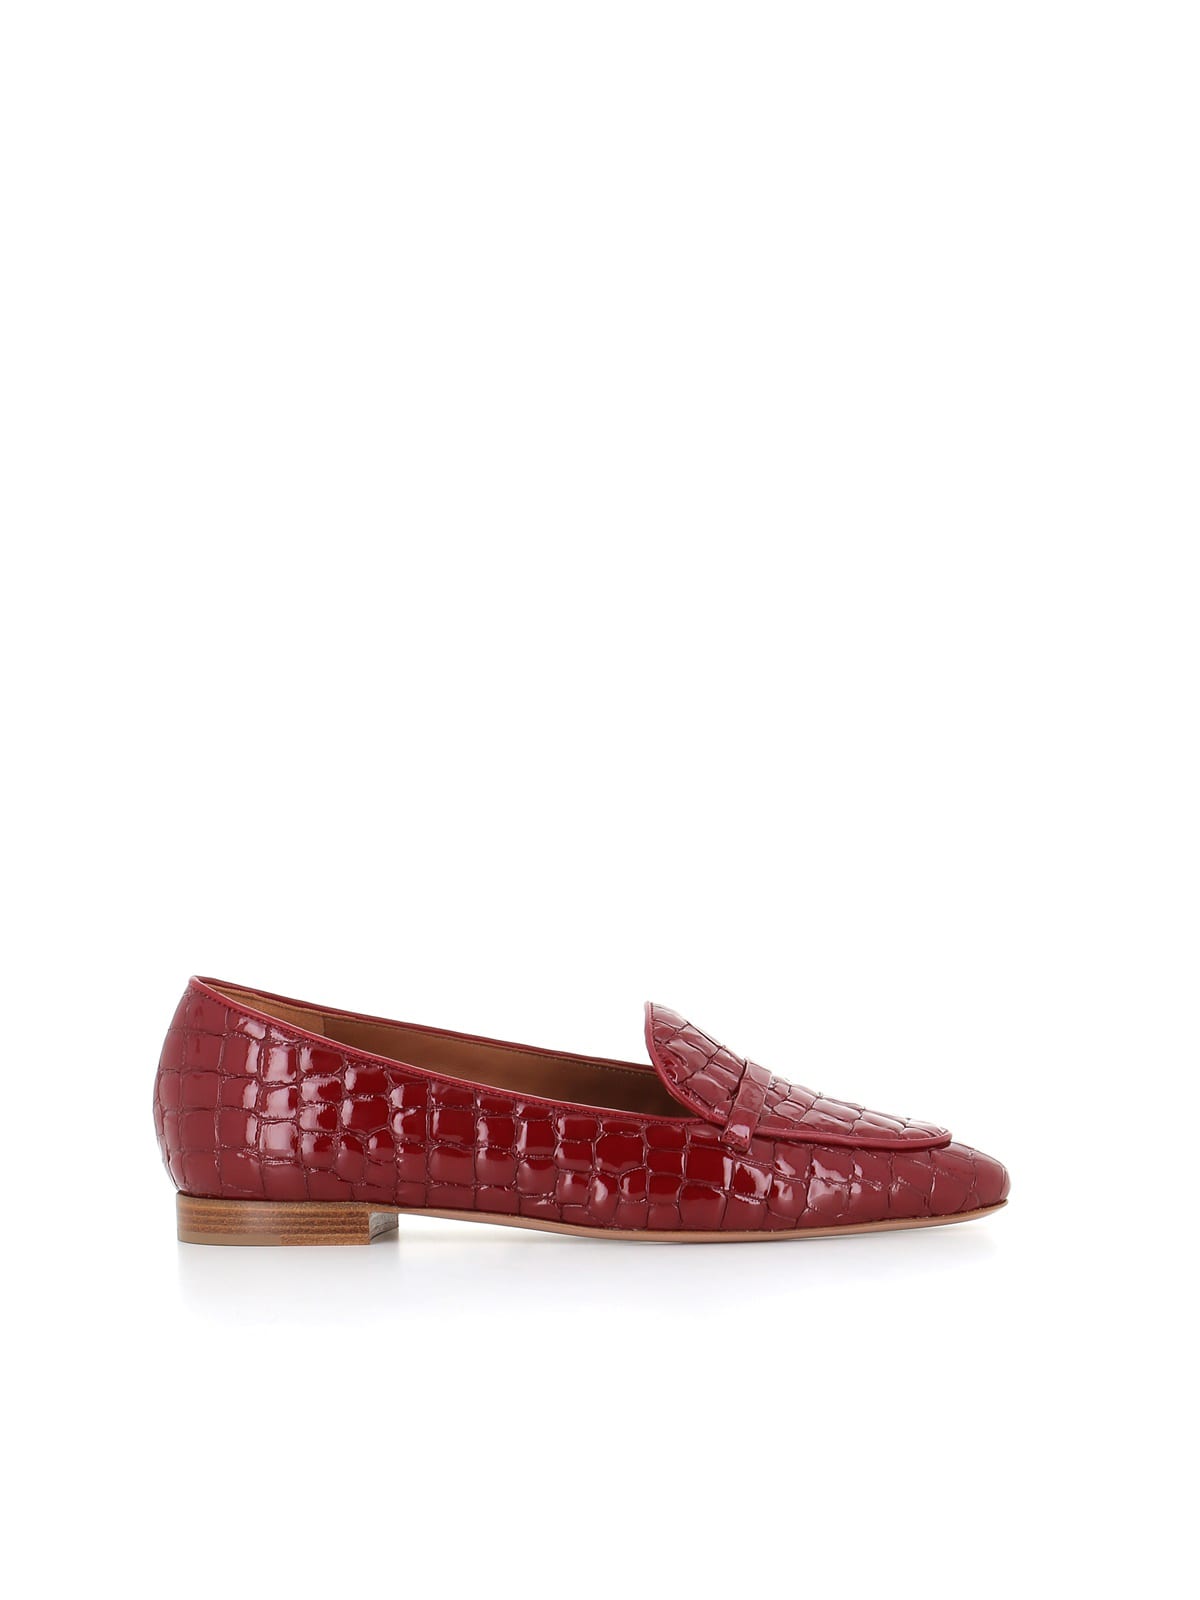 malone souliers loafer bruni 10-17